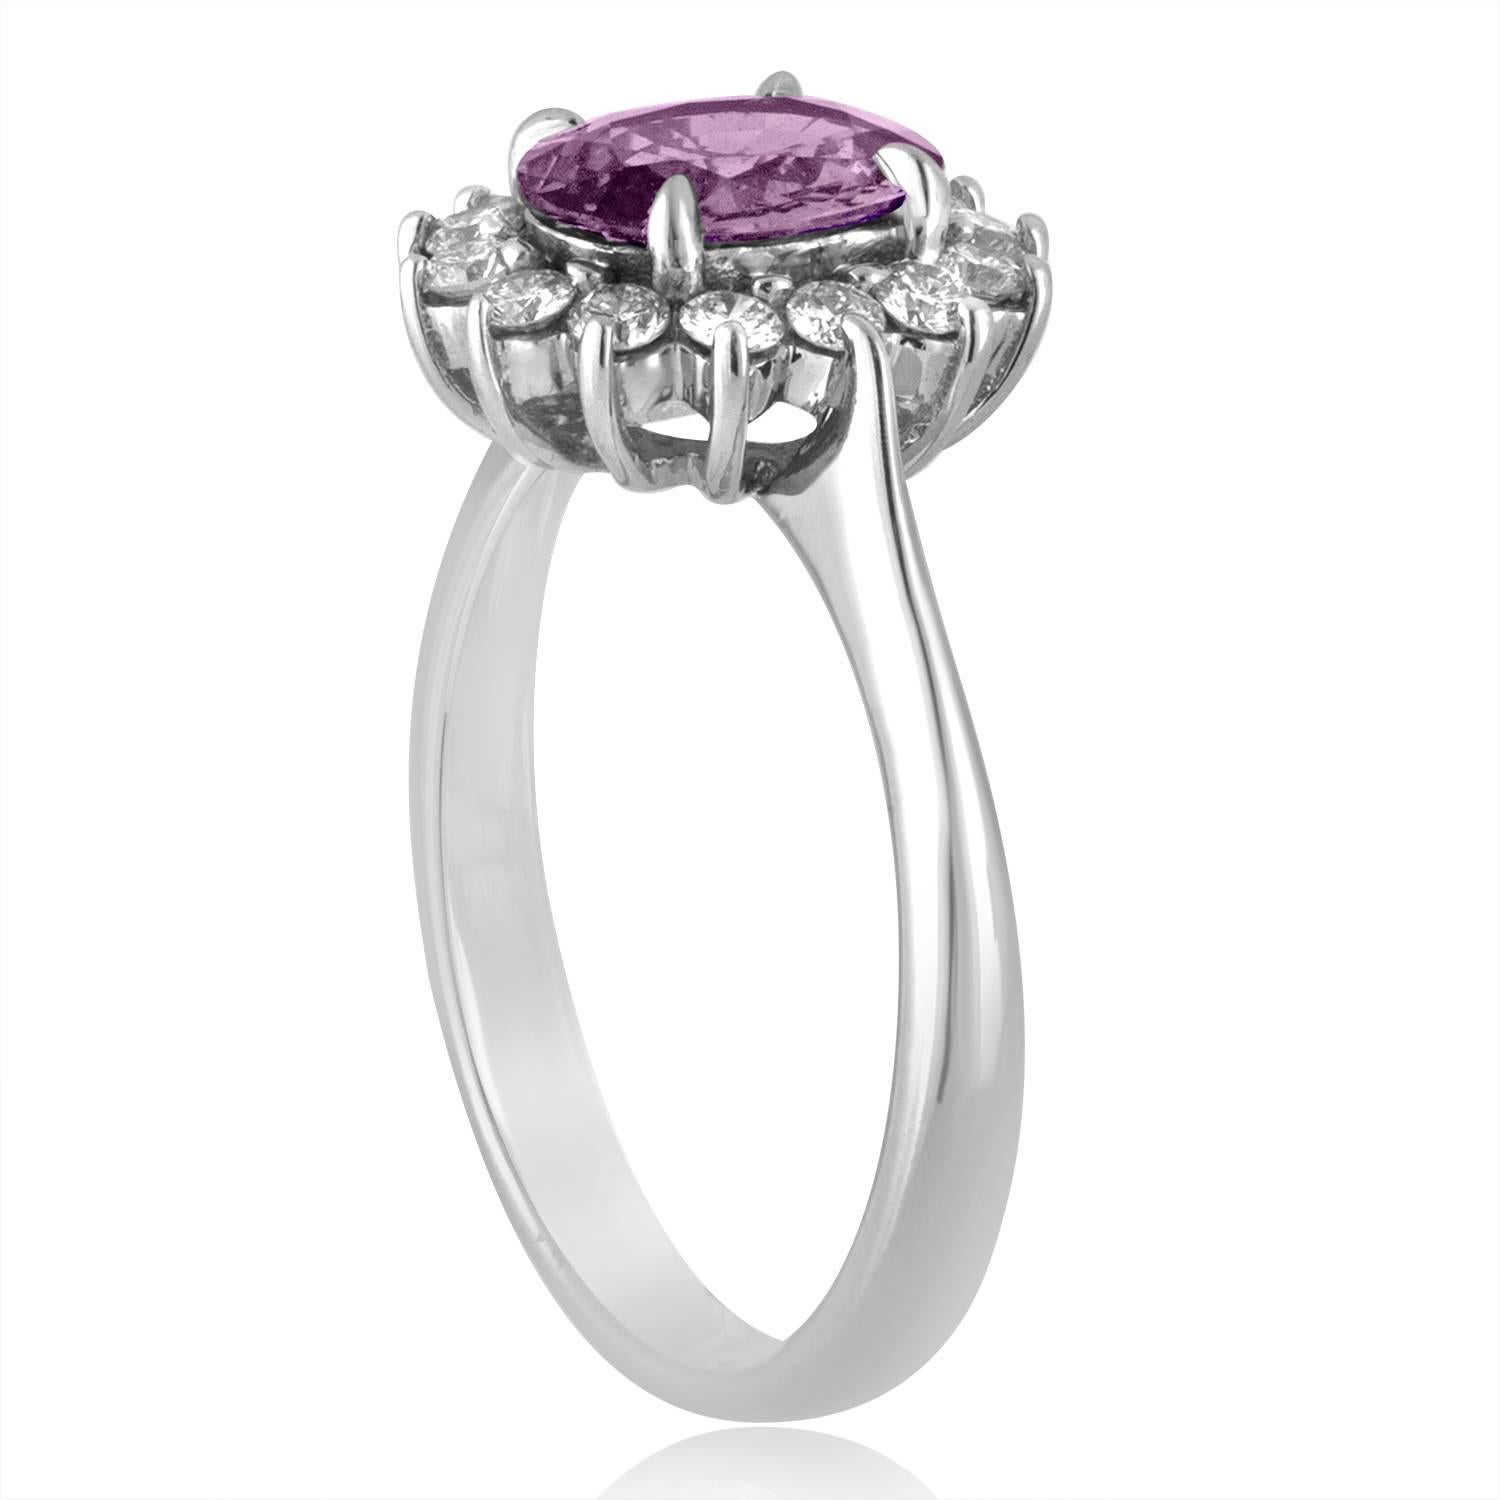 Classy Violet Sapphire Ring
This is an 14K White Gold Ring
The center is a Certified NO HEAT Oval Violet Sapphire 1.32 Carats.
The sapphire is certified by LAPIS.
There are 0.37 Carats in Diamonds G VS.
The ring is a size 6.75, sizable.
The